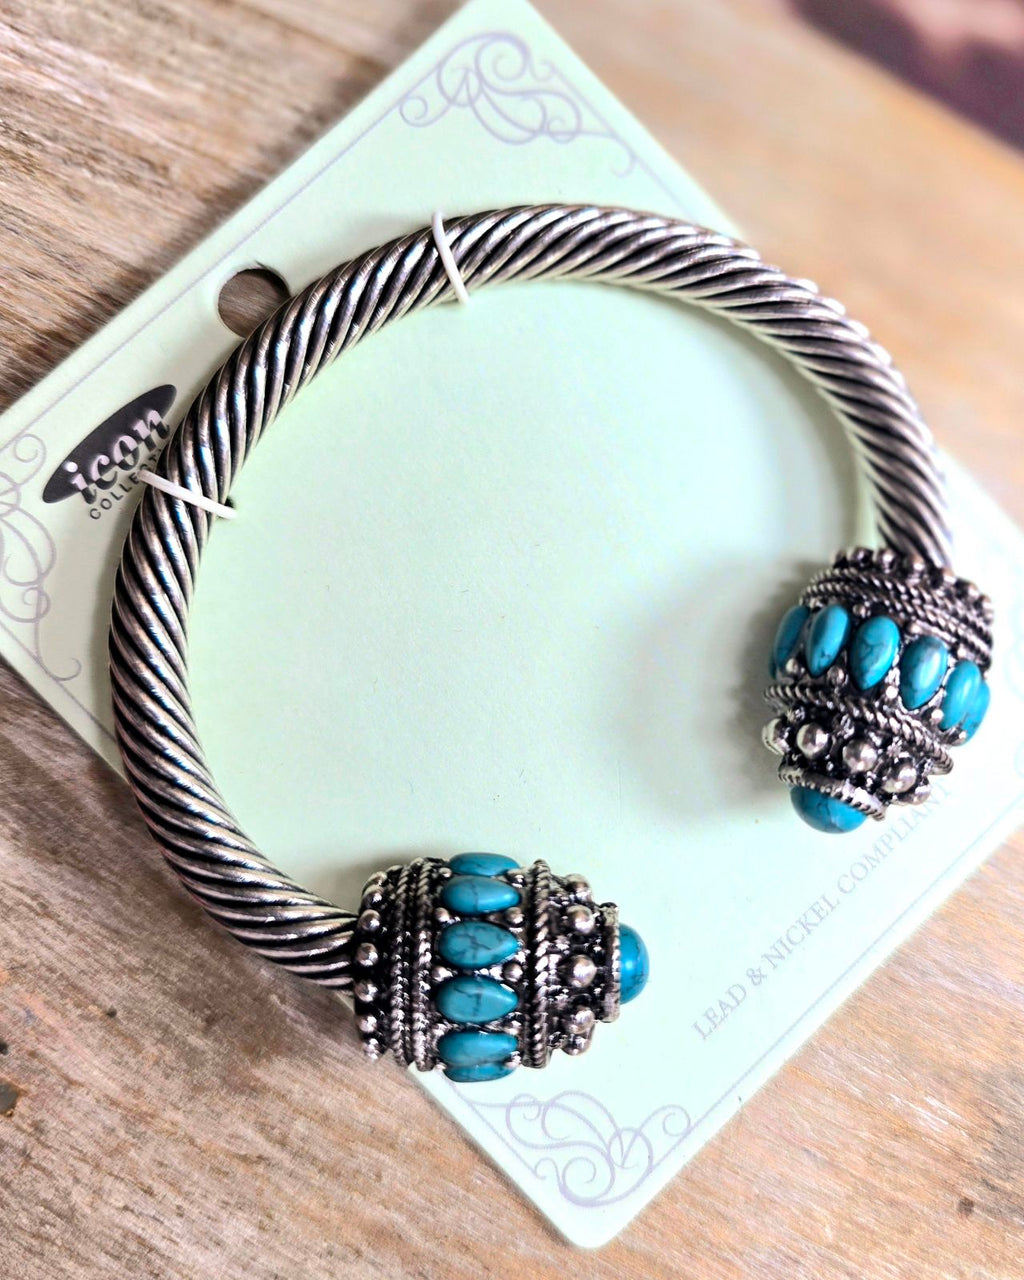 Silver cuff bracelet with turquoise